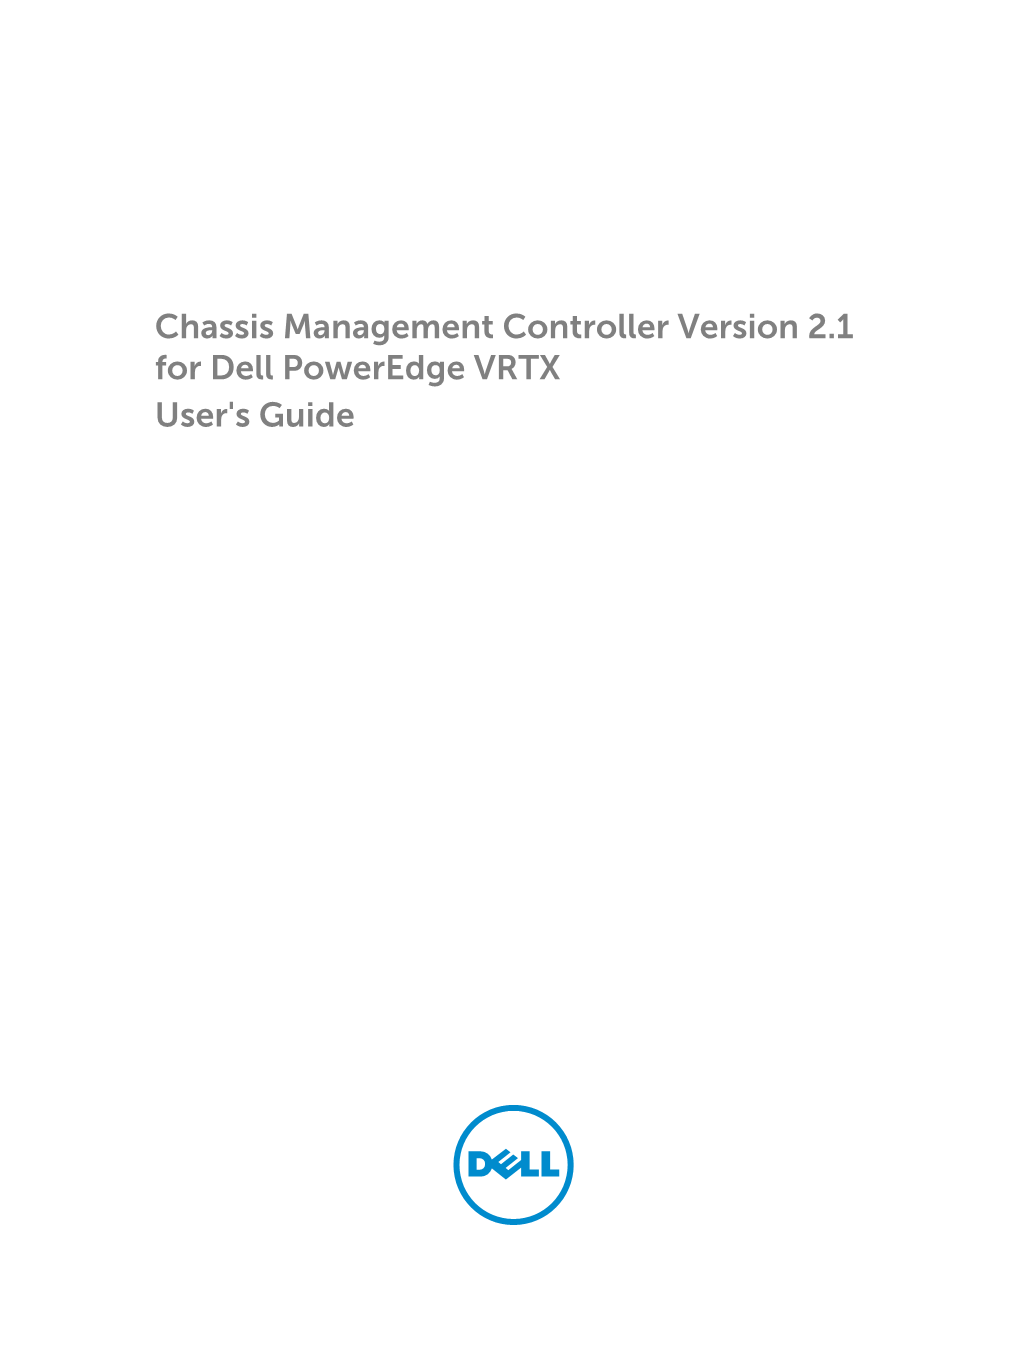 Chassis Management Controller Version 2.1 for Dell Poweredge VRTX User's Guide Notes, Cautions, and Warnings